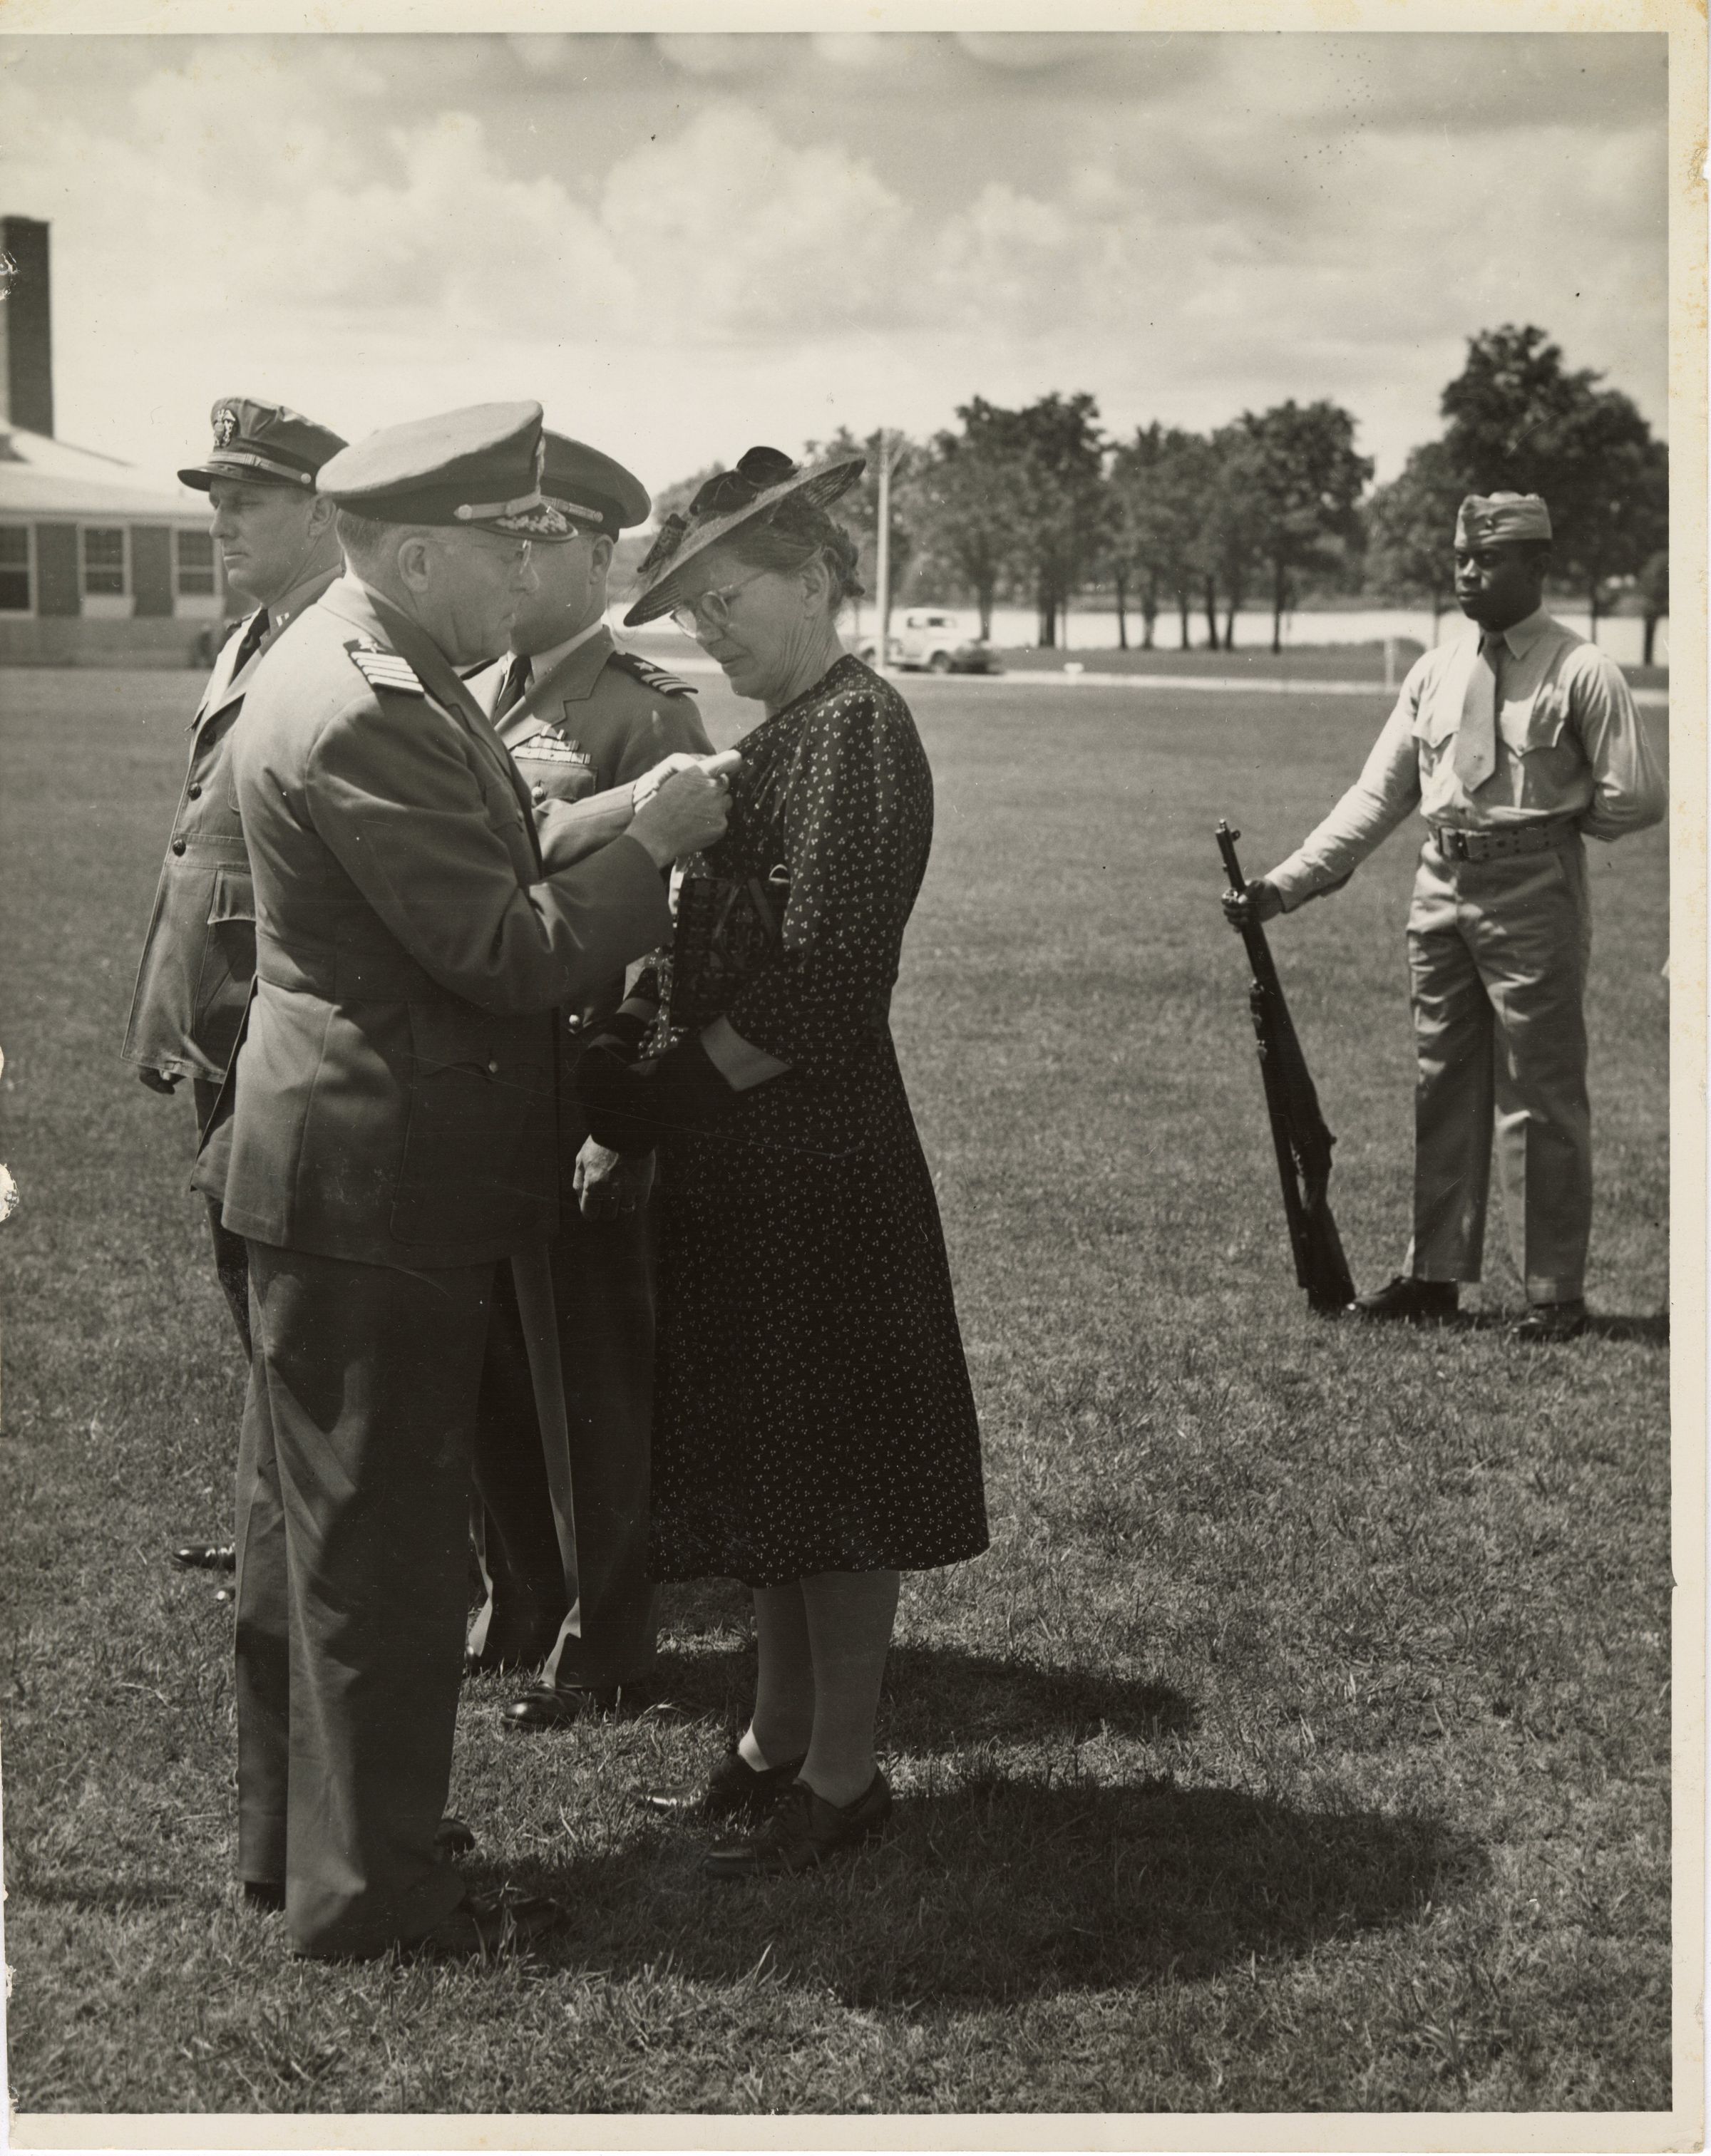 Primary Image of Stella Stover Receiving a Medal Awarded Posthumously for her Son.